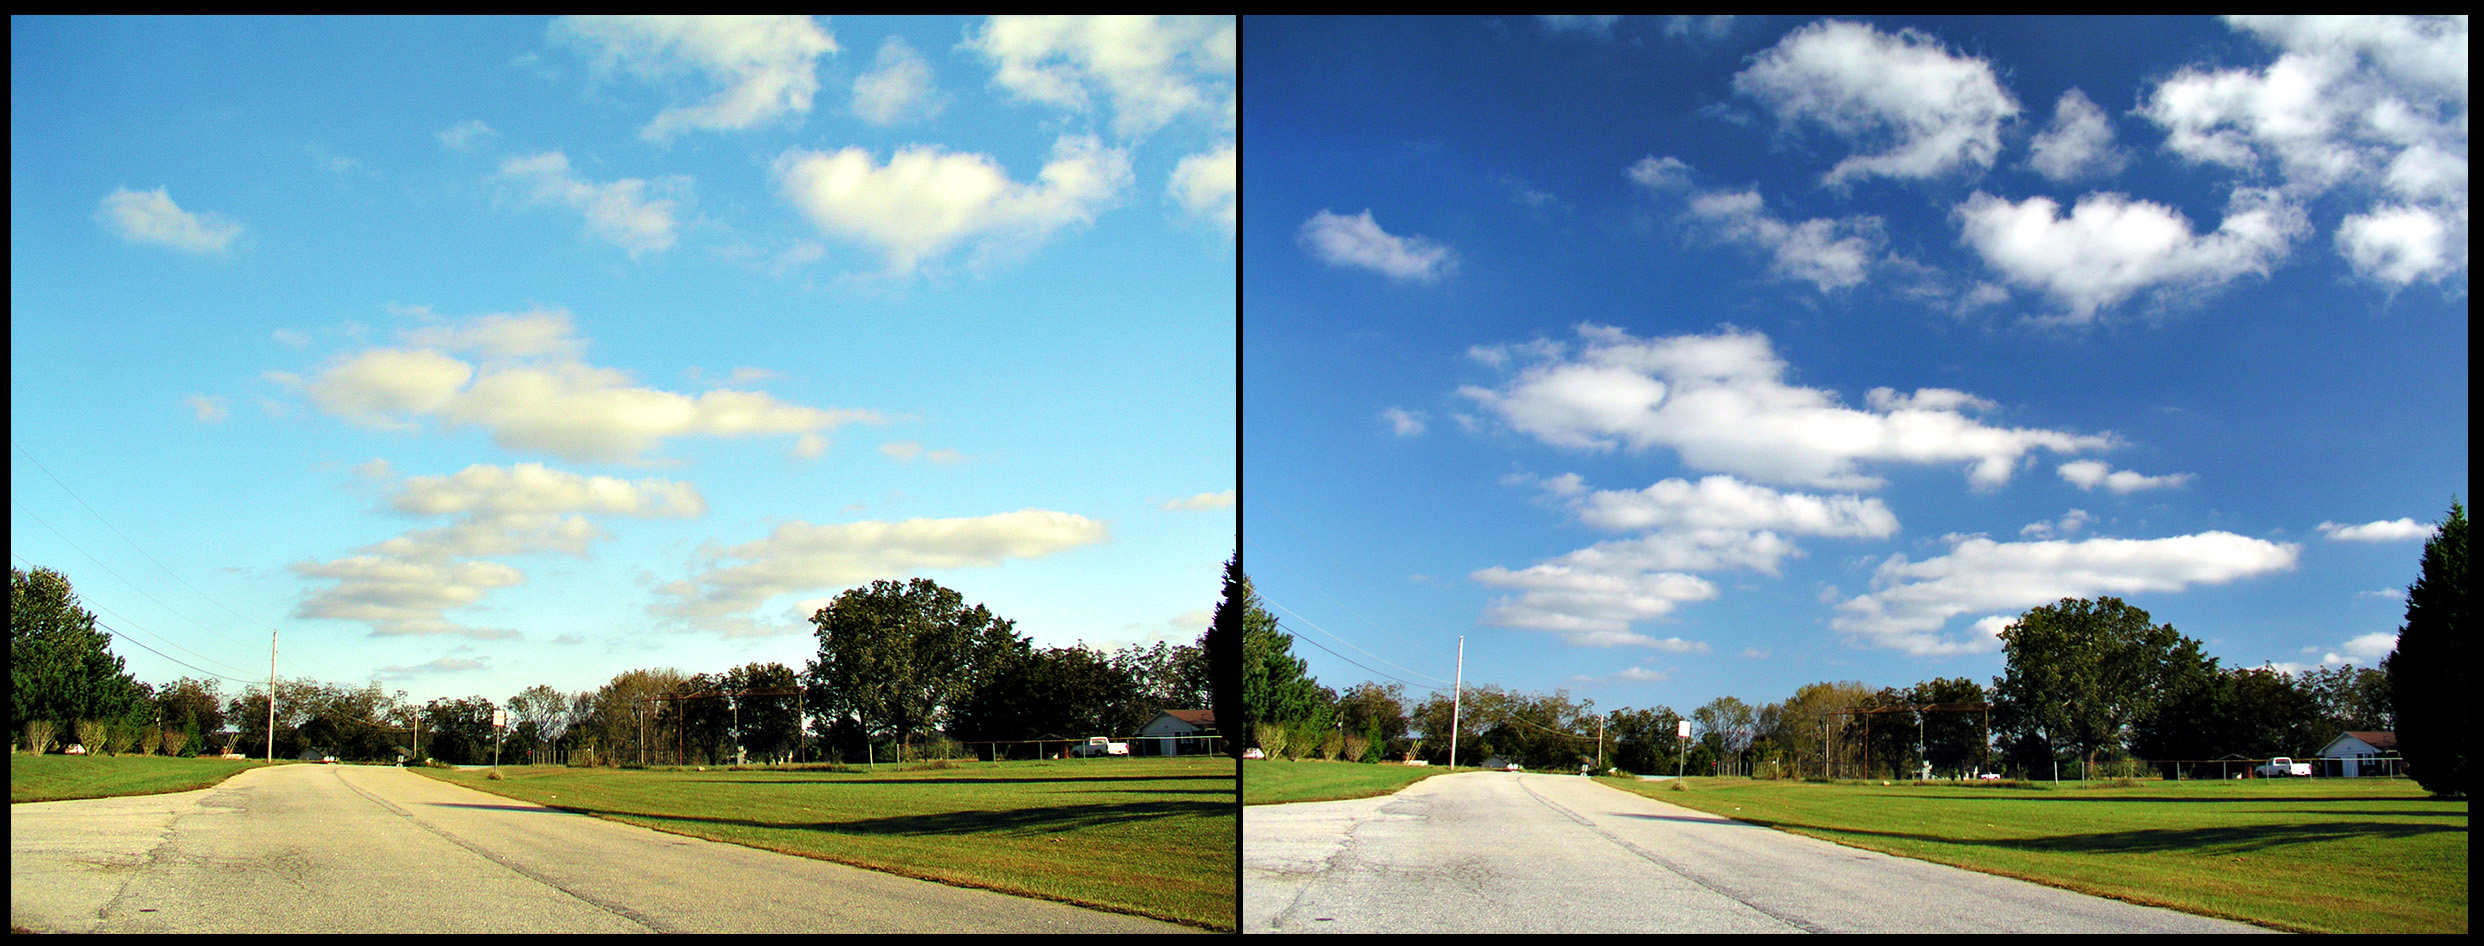 [Two photographs of the same scene, one with a polarized filter, dimming the photograph and enhancing contrast.[1]]